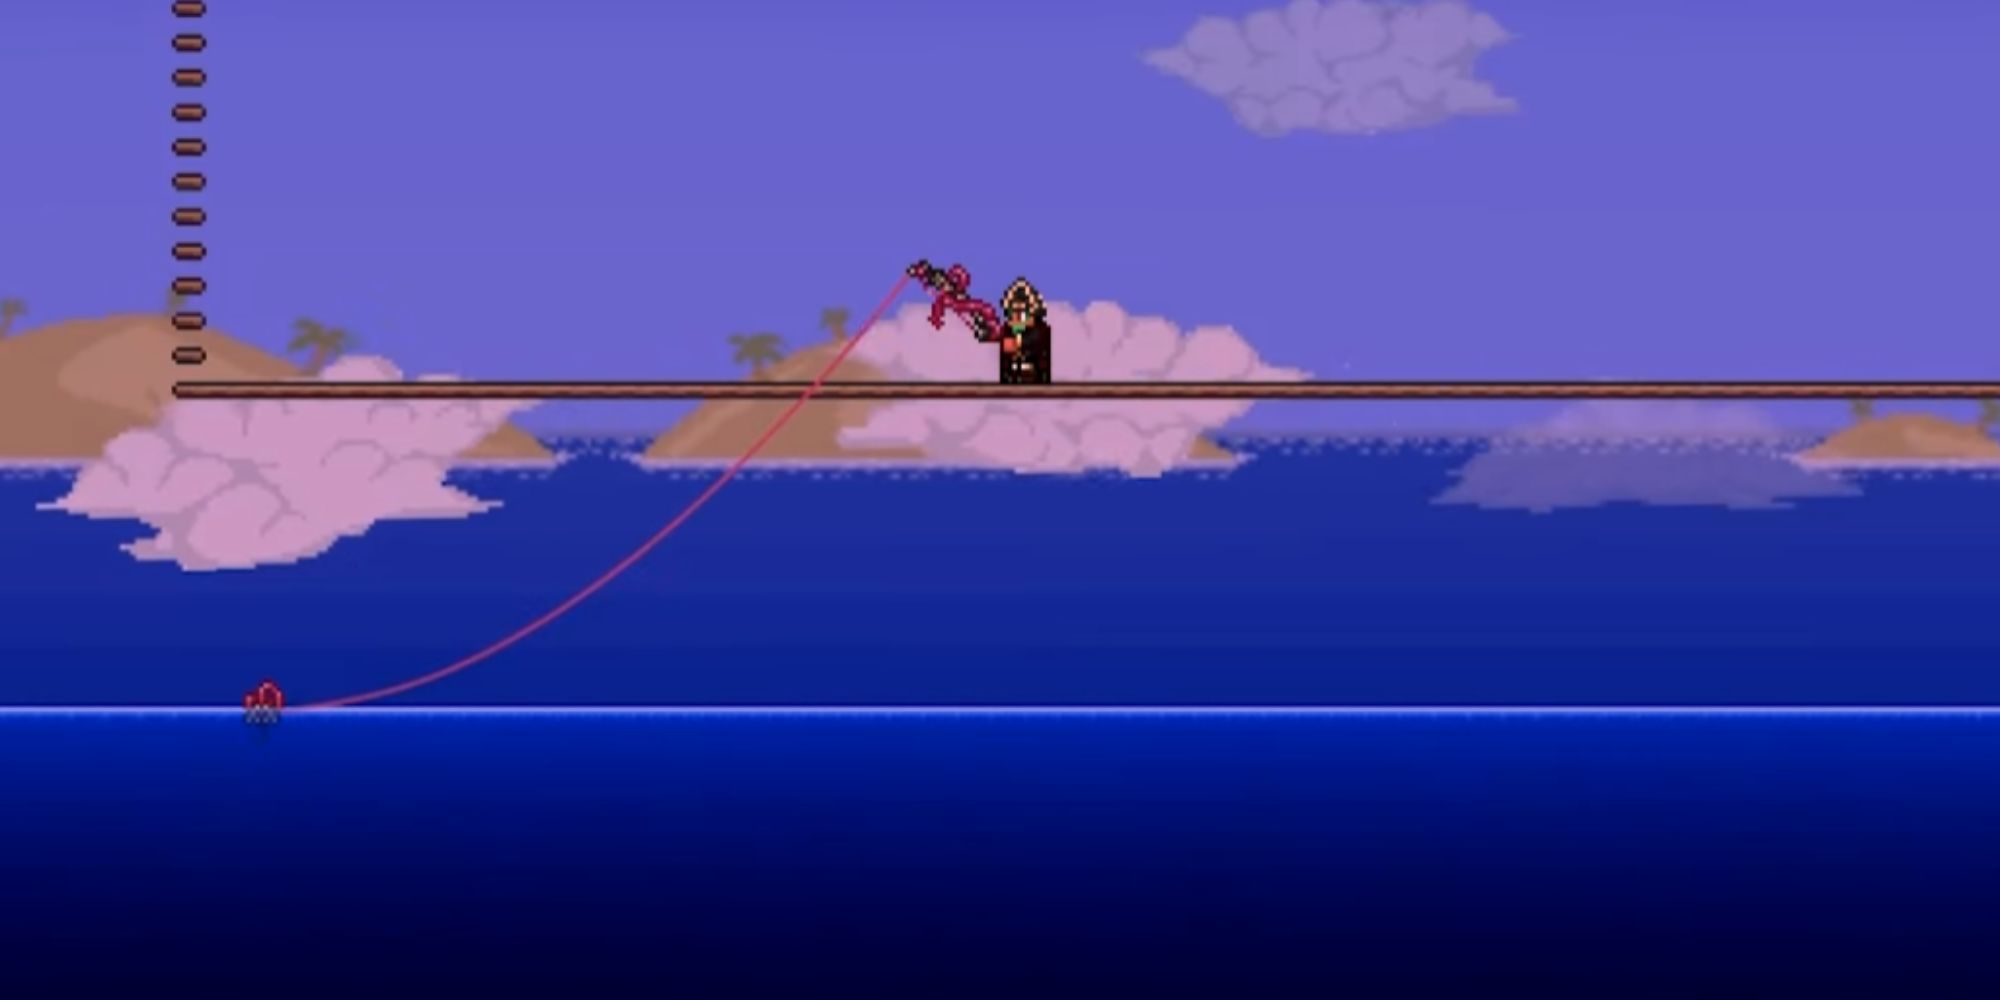 Terraria Character Fishing With A Truffle Worm